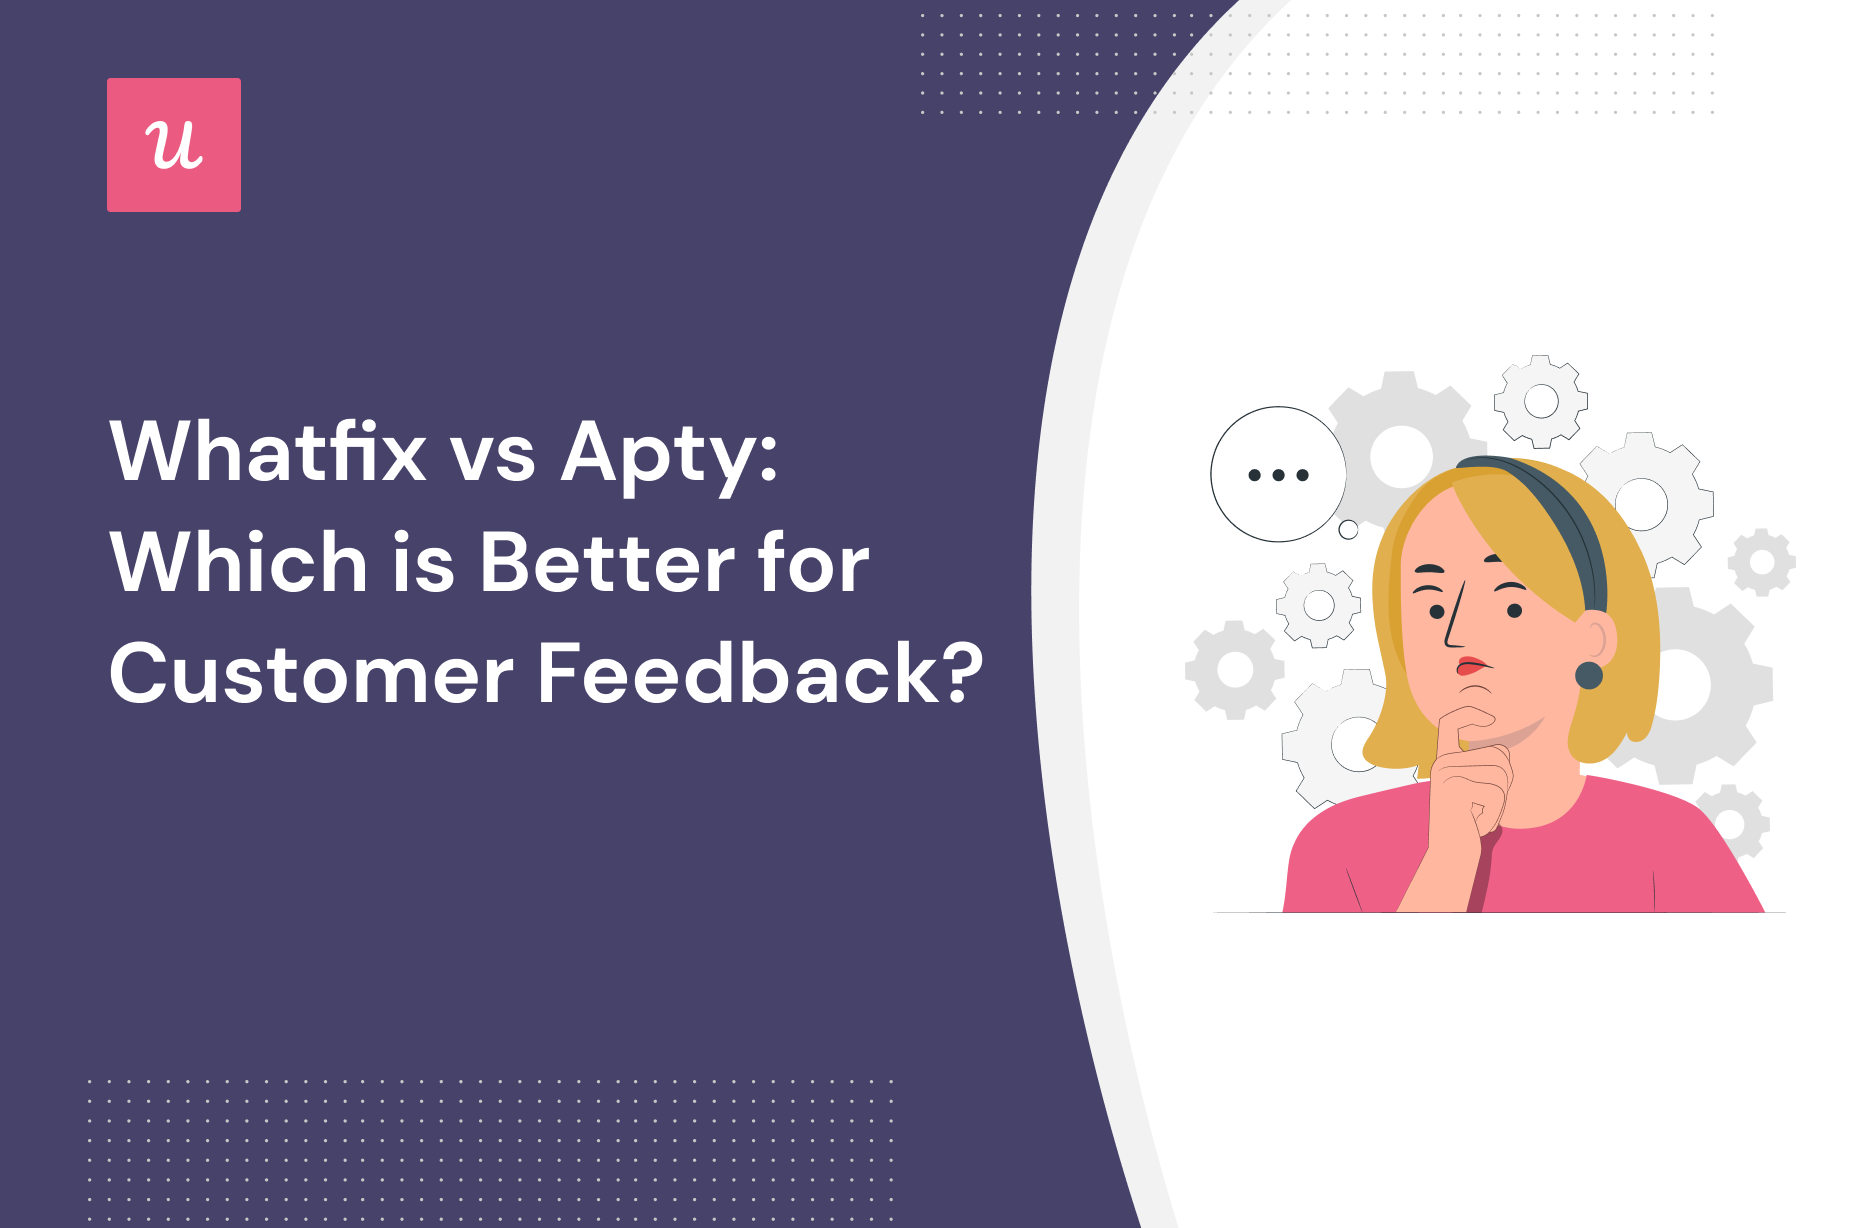 Whatfix vs Apty: Which is Better for Customer Feedback?